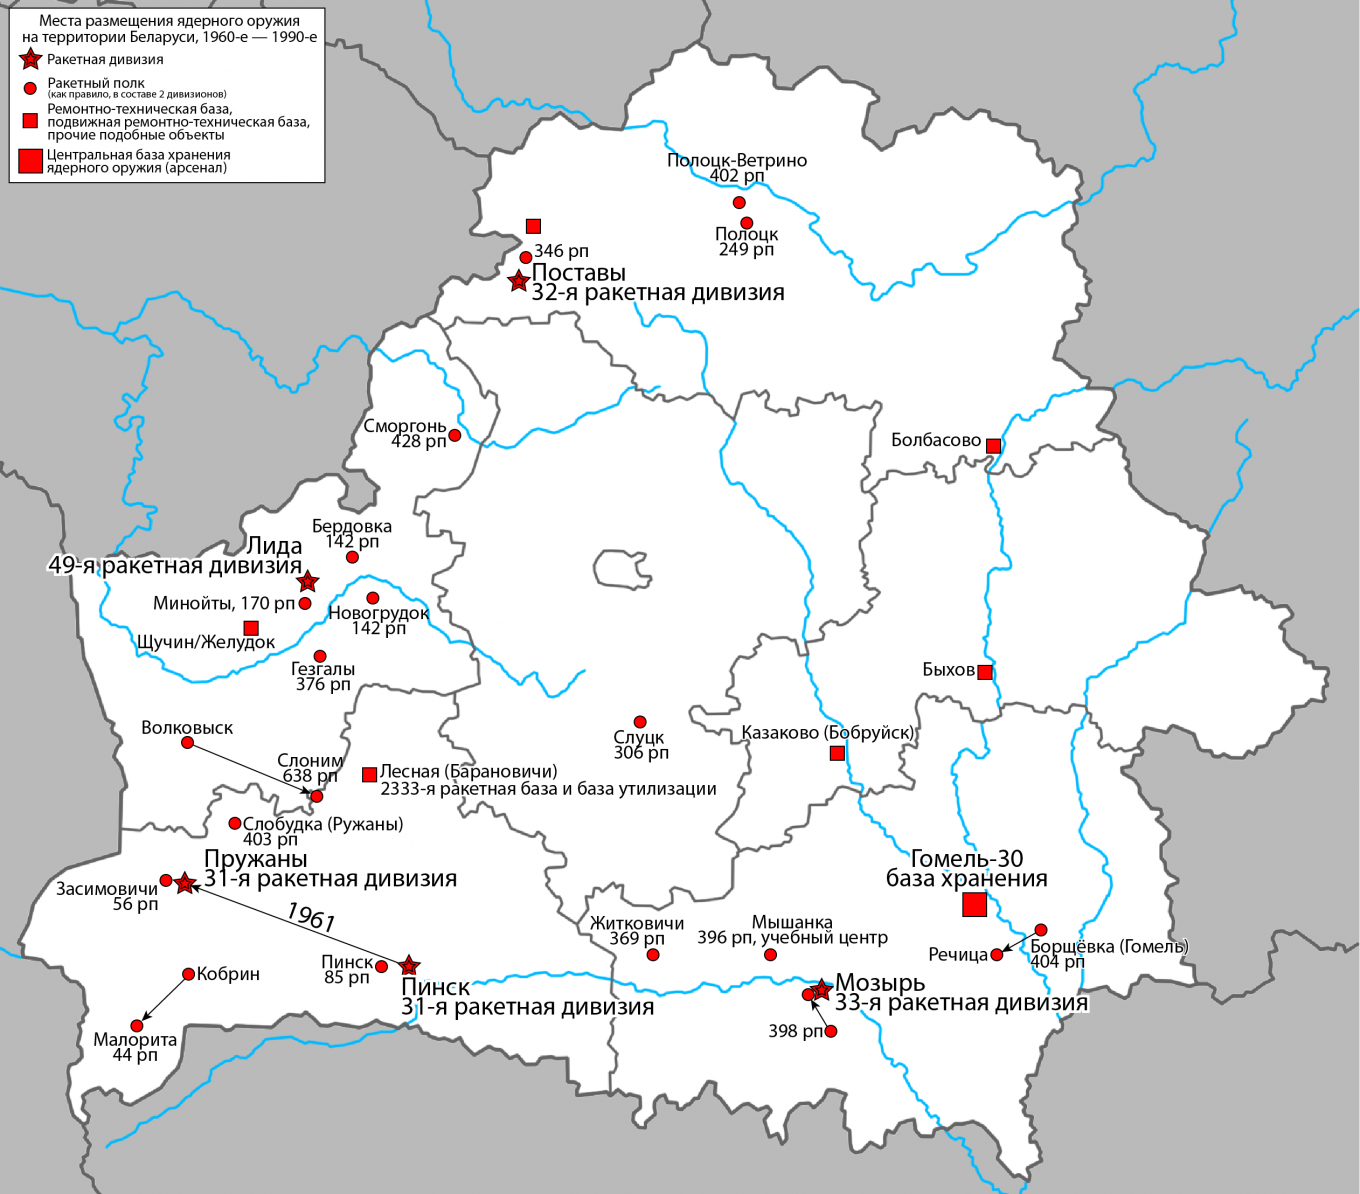 map of locations of nuclear weapons on the territory of belarus in 1960-1990, Defense Express